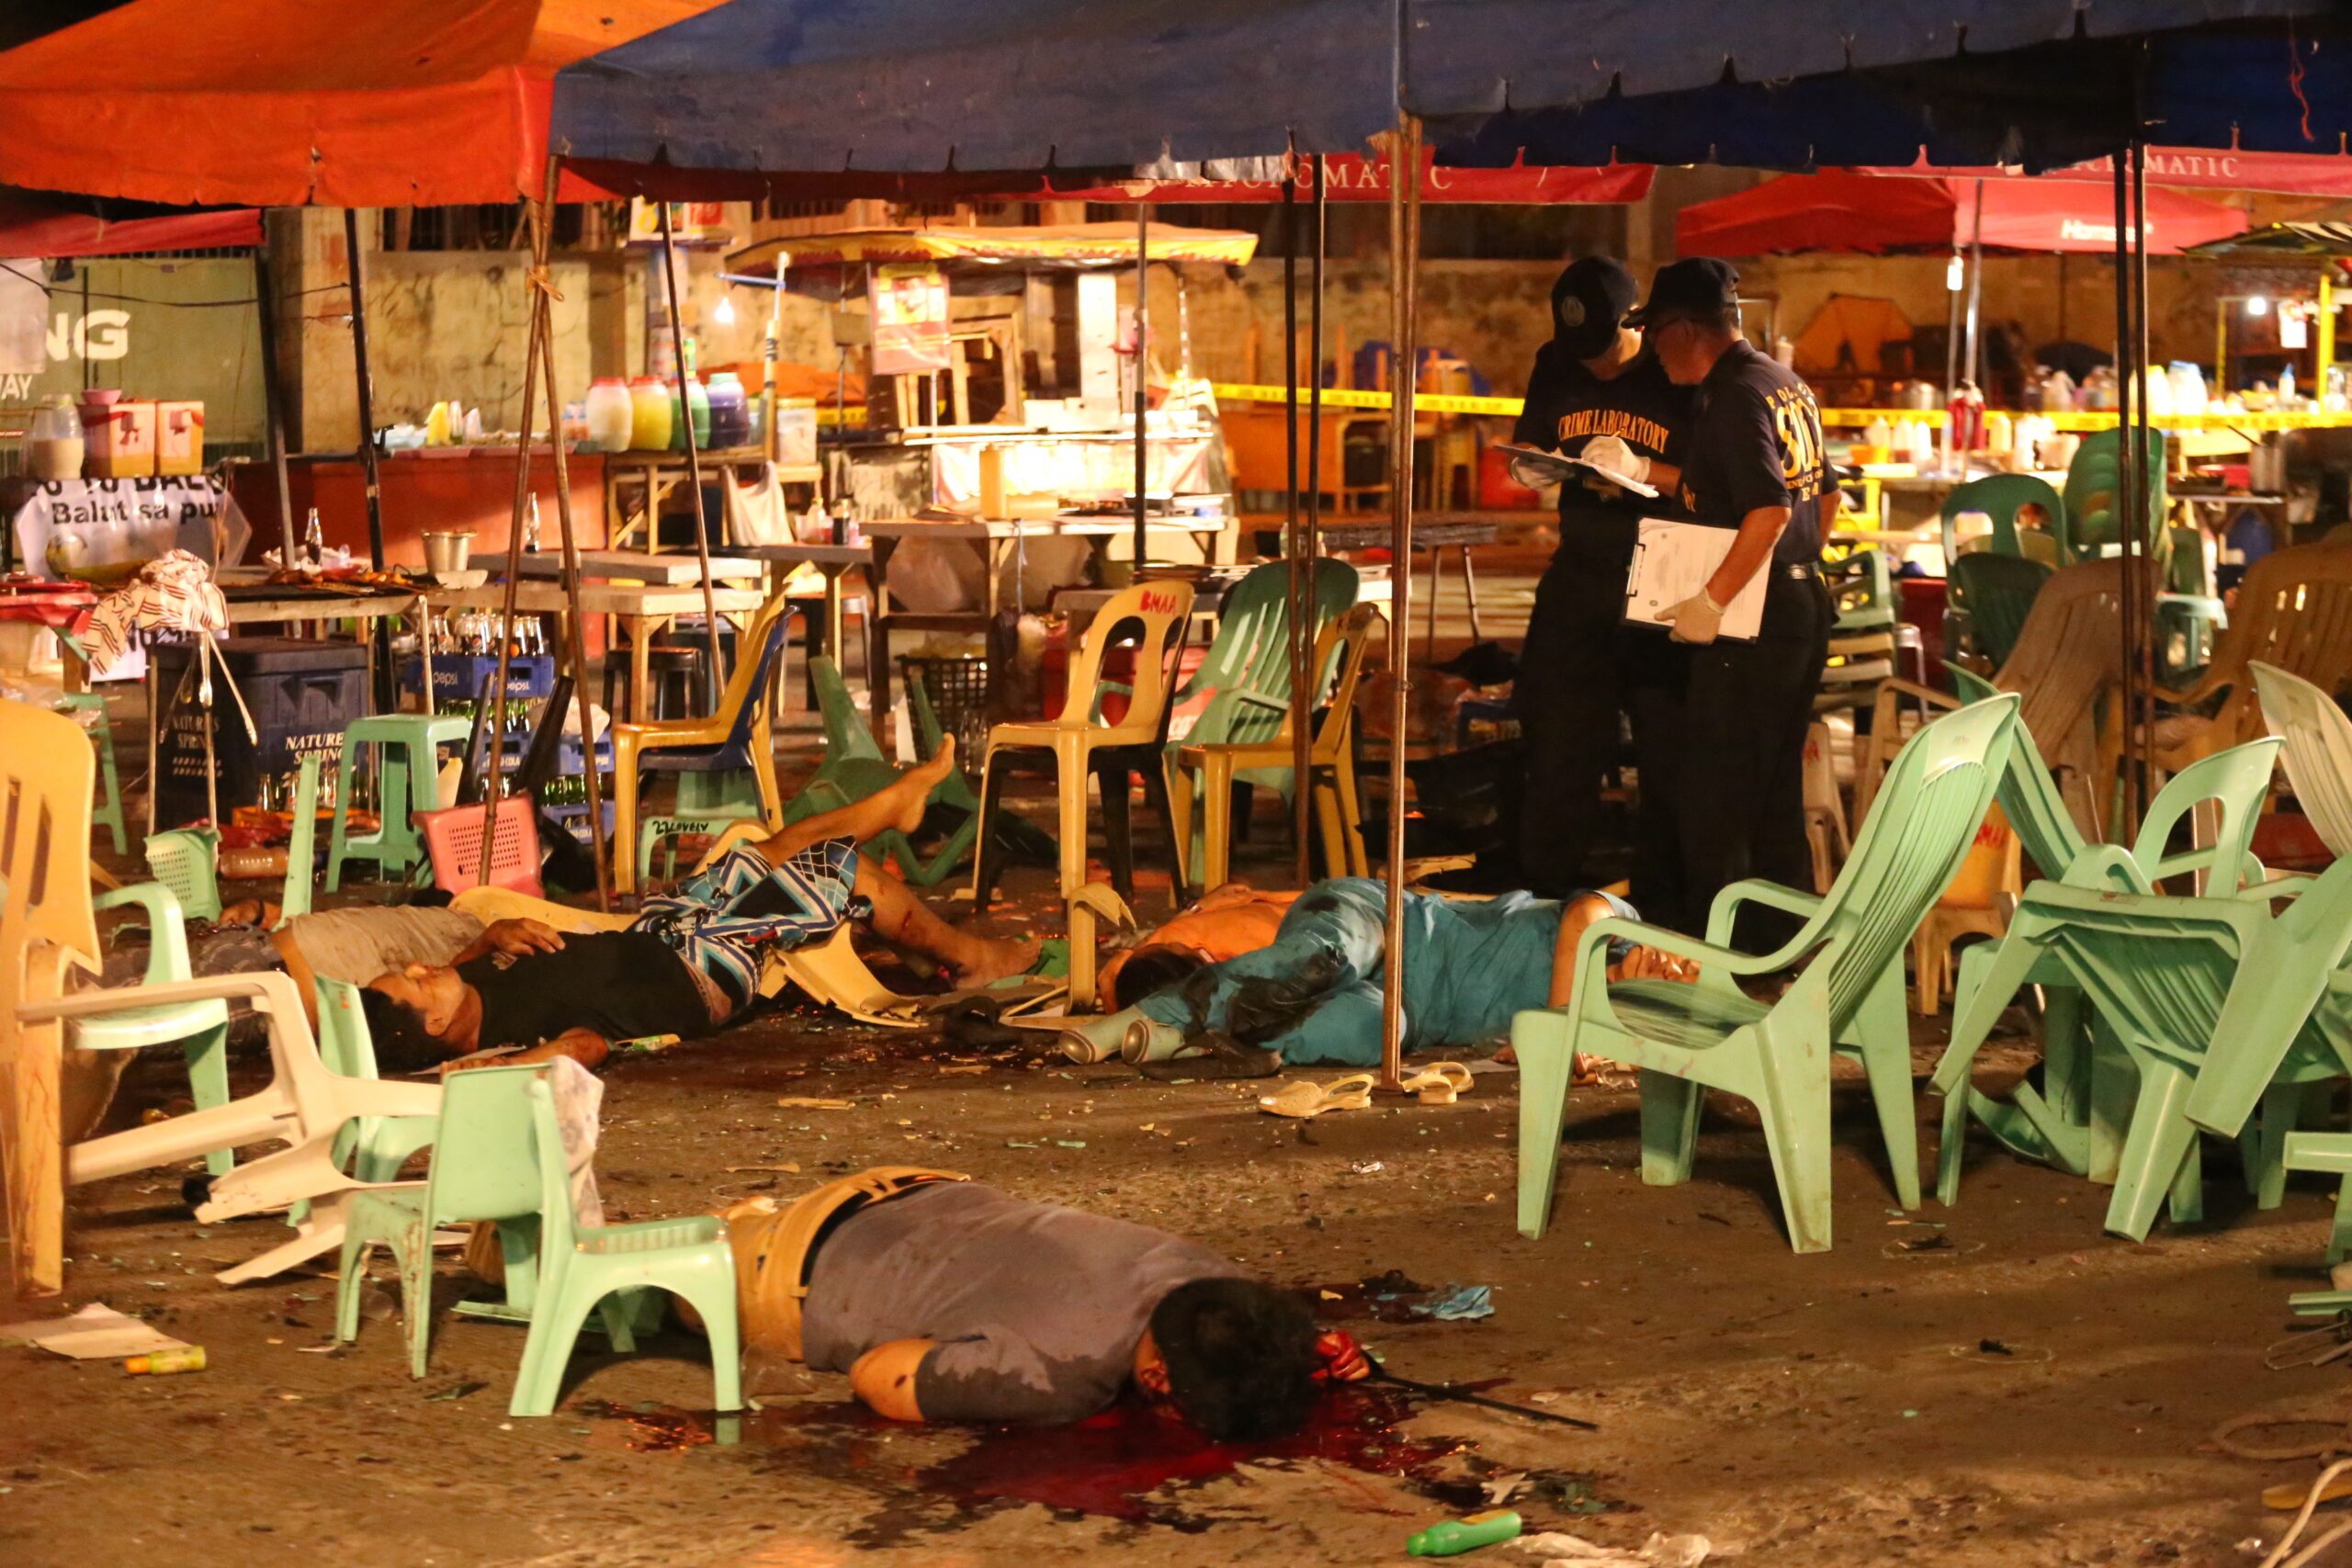 Countries issue travel warnings after Davao bombing